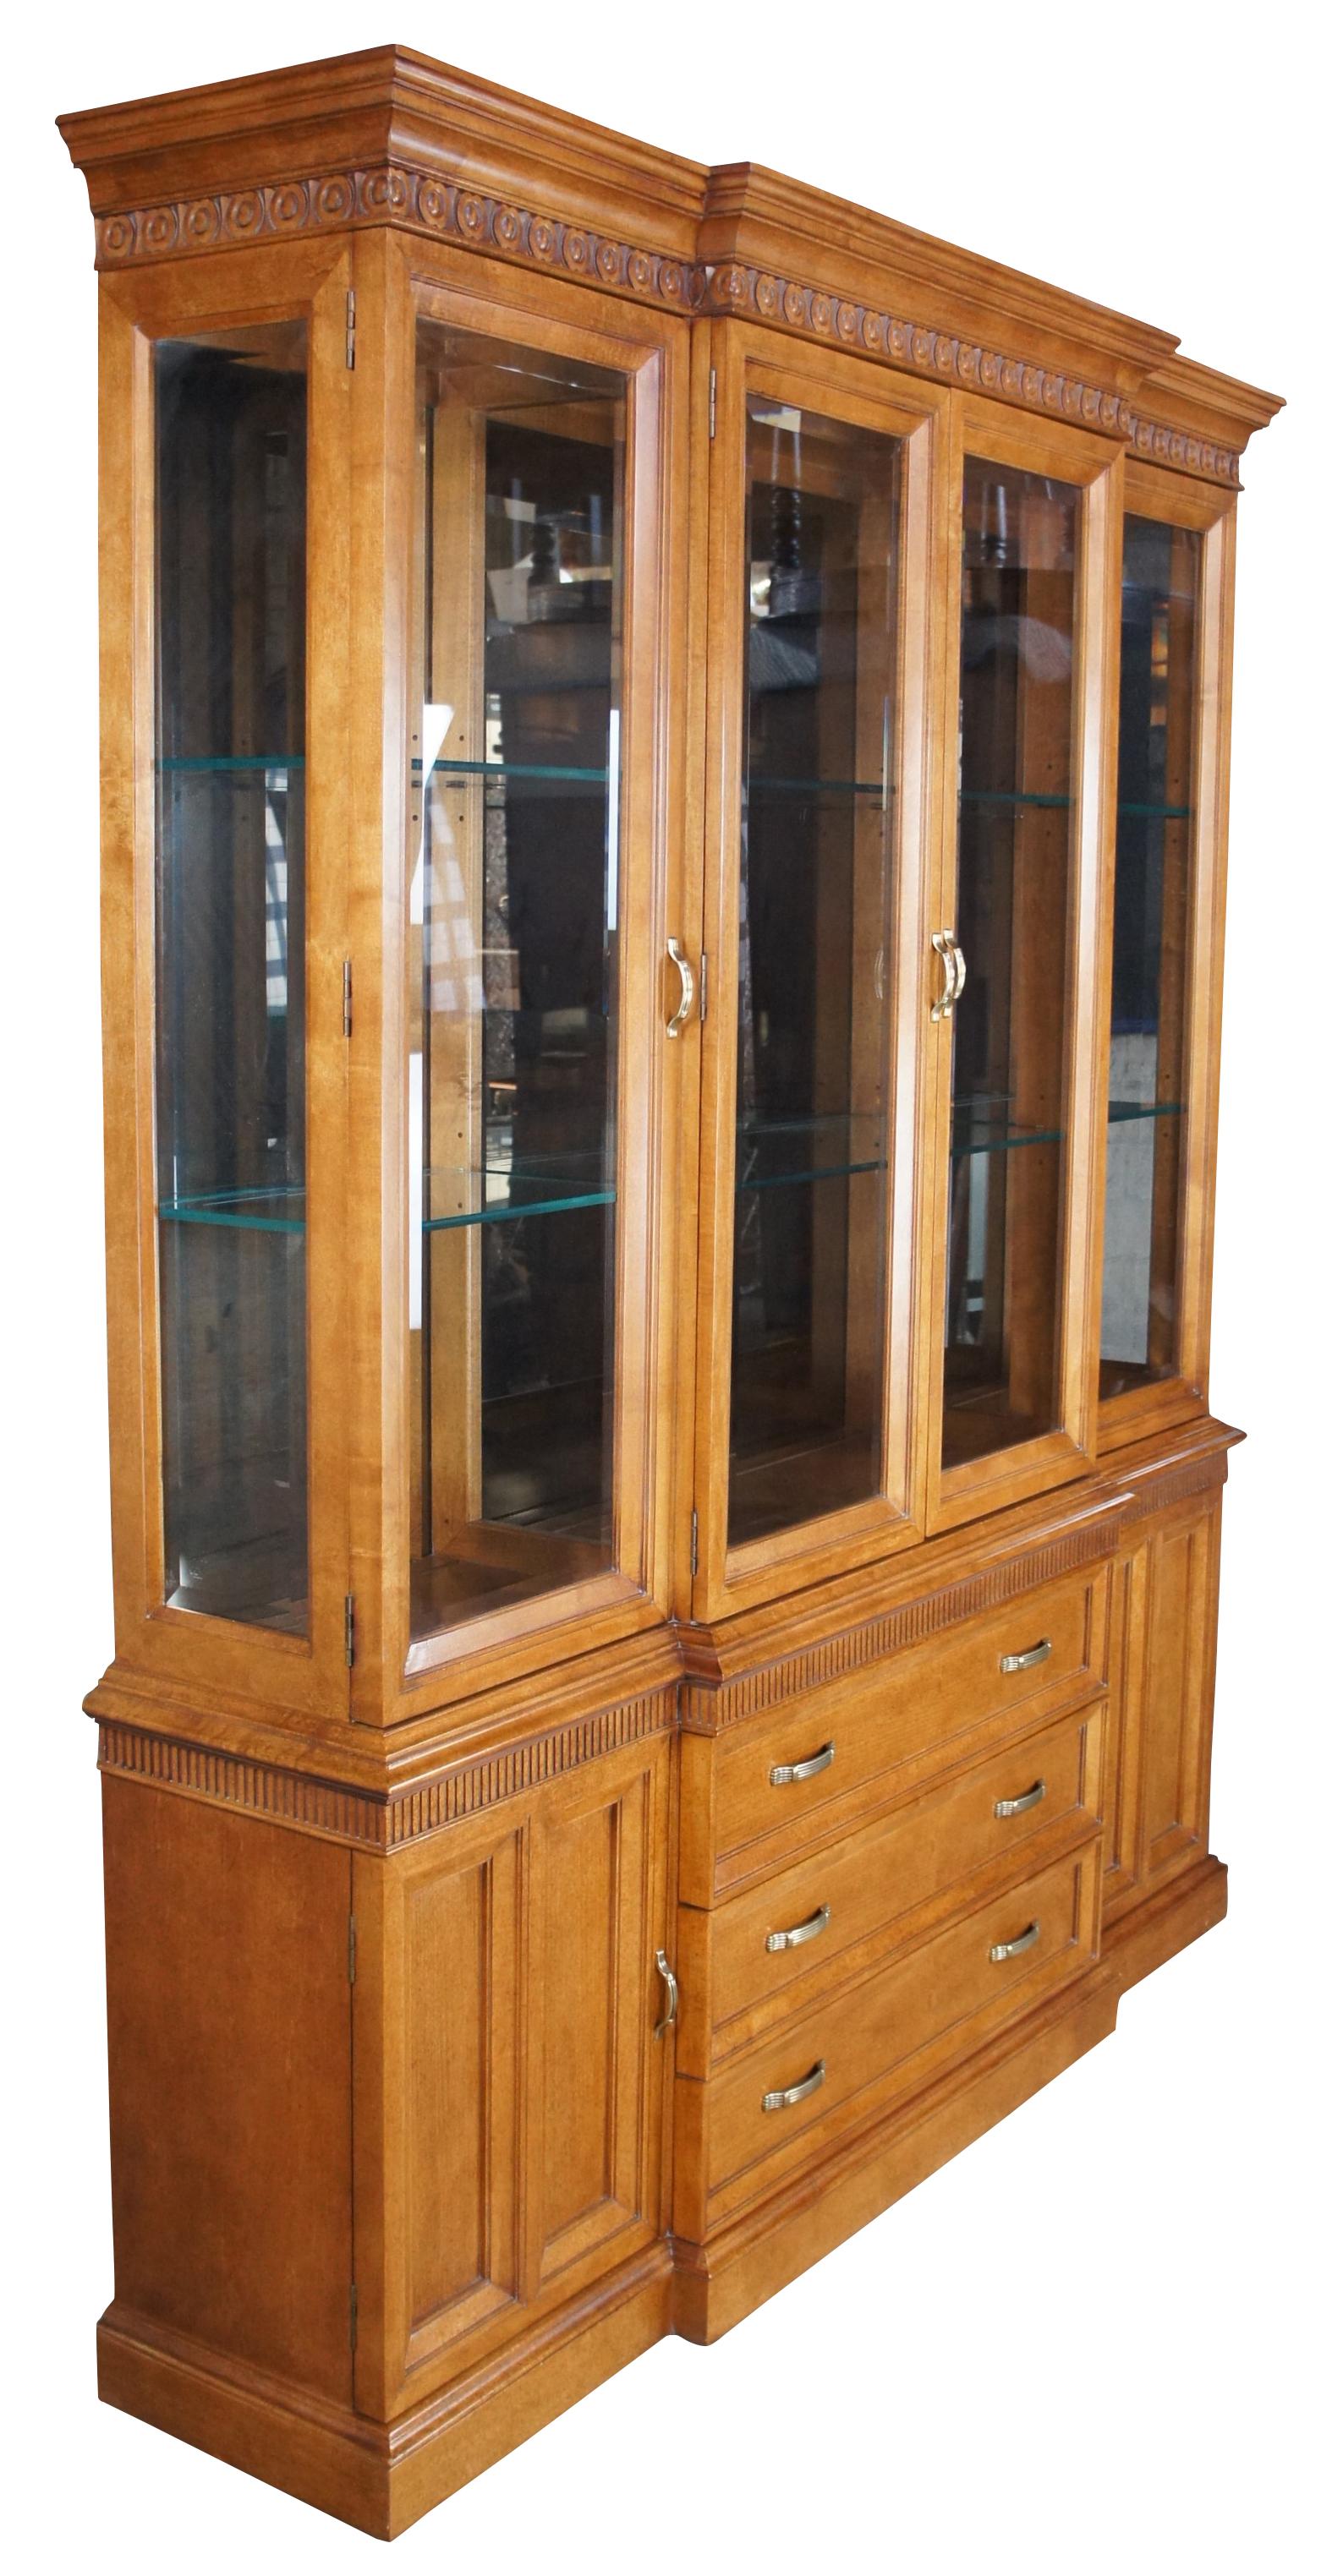 Vintage Century Furniture illuminating breakfront. Made of maple featuring French Neoclassical styling with bullseye banding, a fluted frieze, beveled glass and brass hardware. The base is centered by three drawers set between outer cabinets with